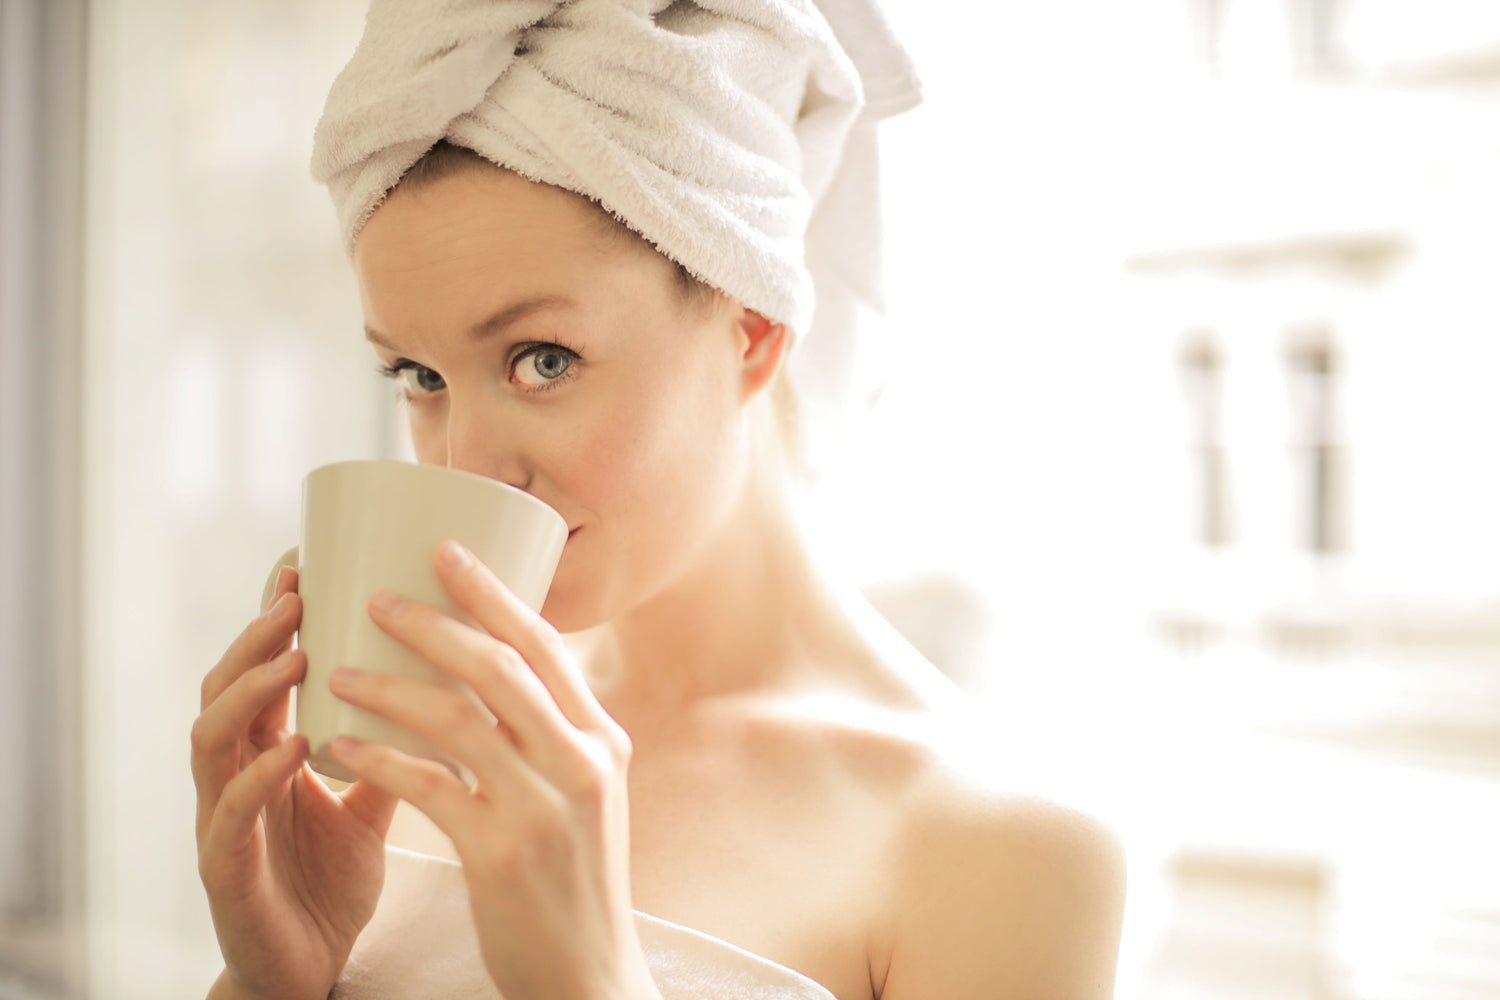 Hot Drinks for Post-Bath Relaxation: Ditch the Cocoa (Just for Tonight)